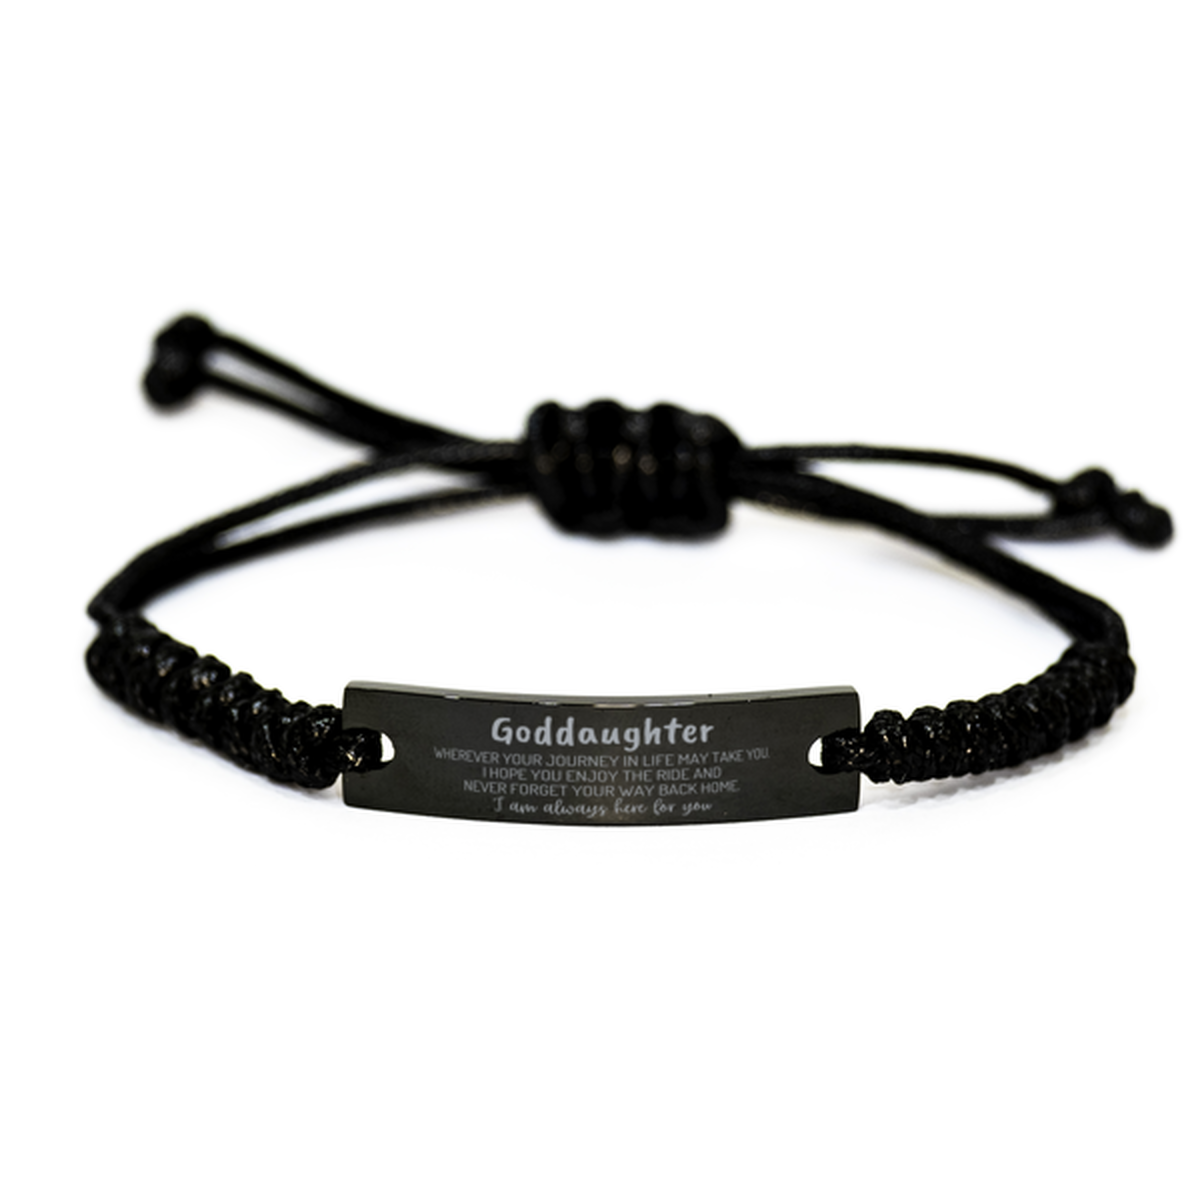 Goddaughter wherever your journey in life may take you, I am always here for you Goddaughter Black Rope Bracelet, Awesome Christmas Gifts For Goddaughter, Goddaughter Birthday Gifts for Men Women Family Loved One